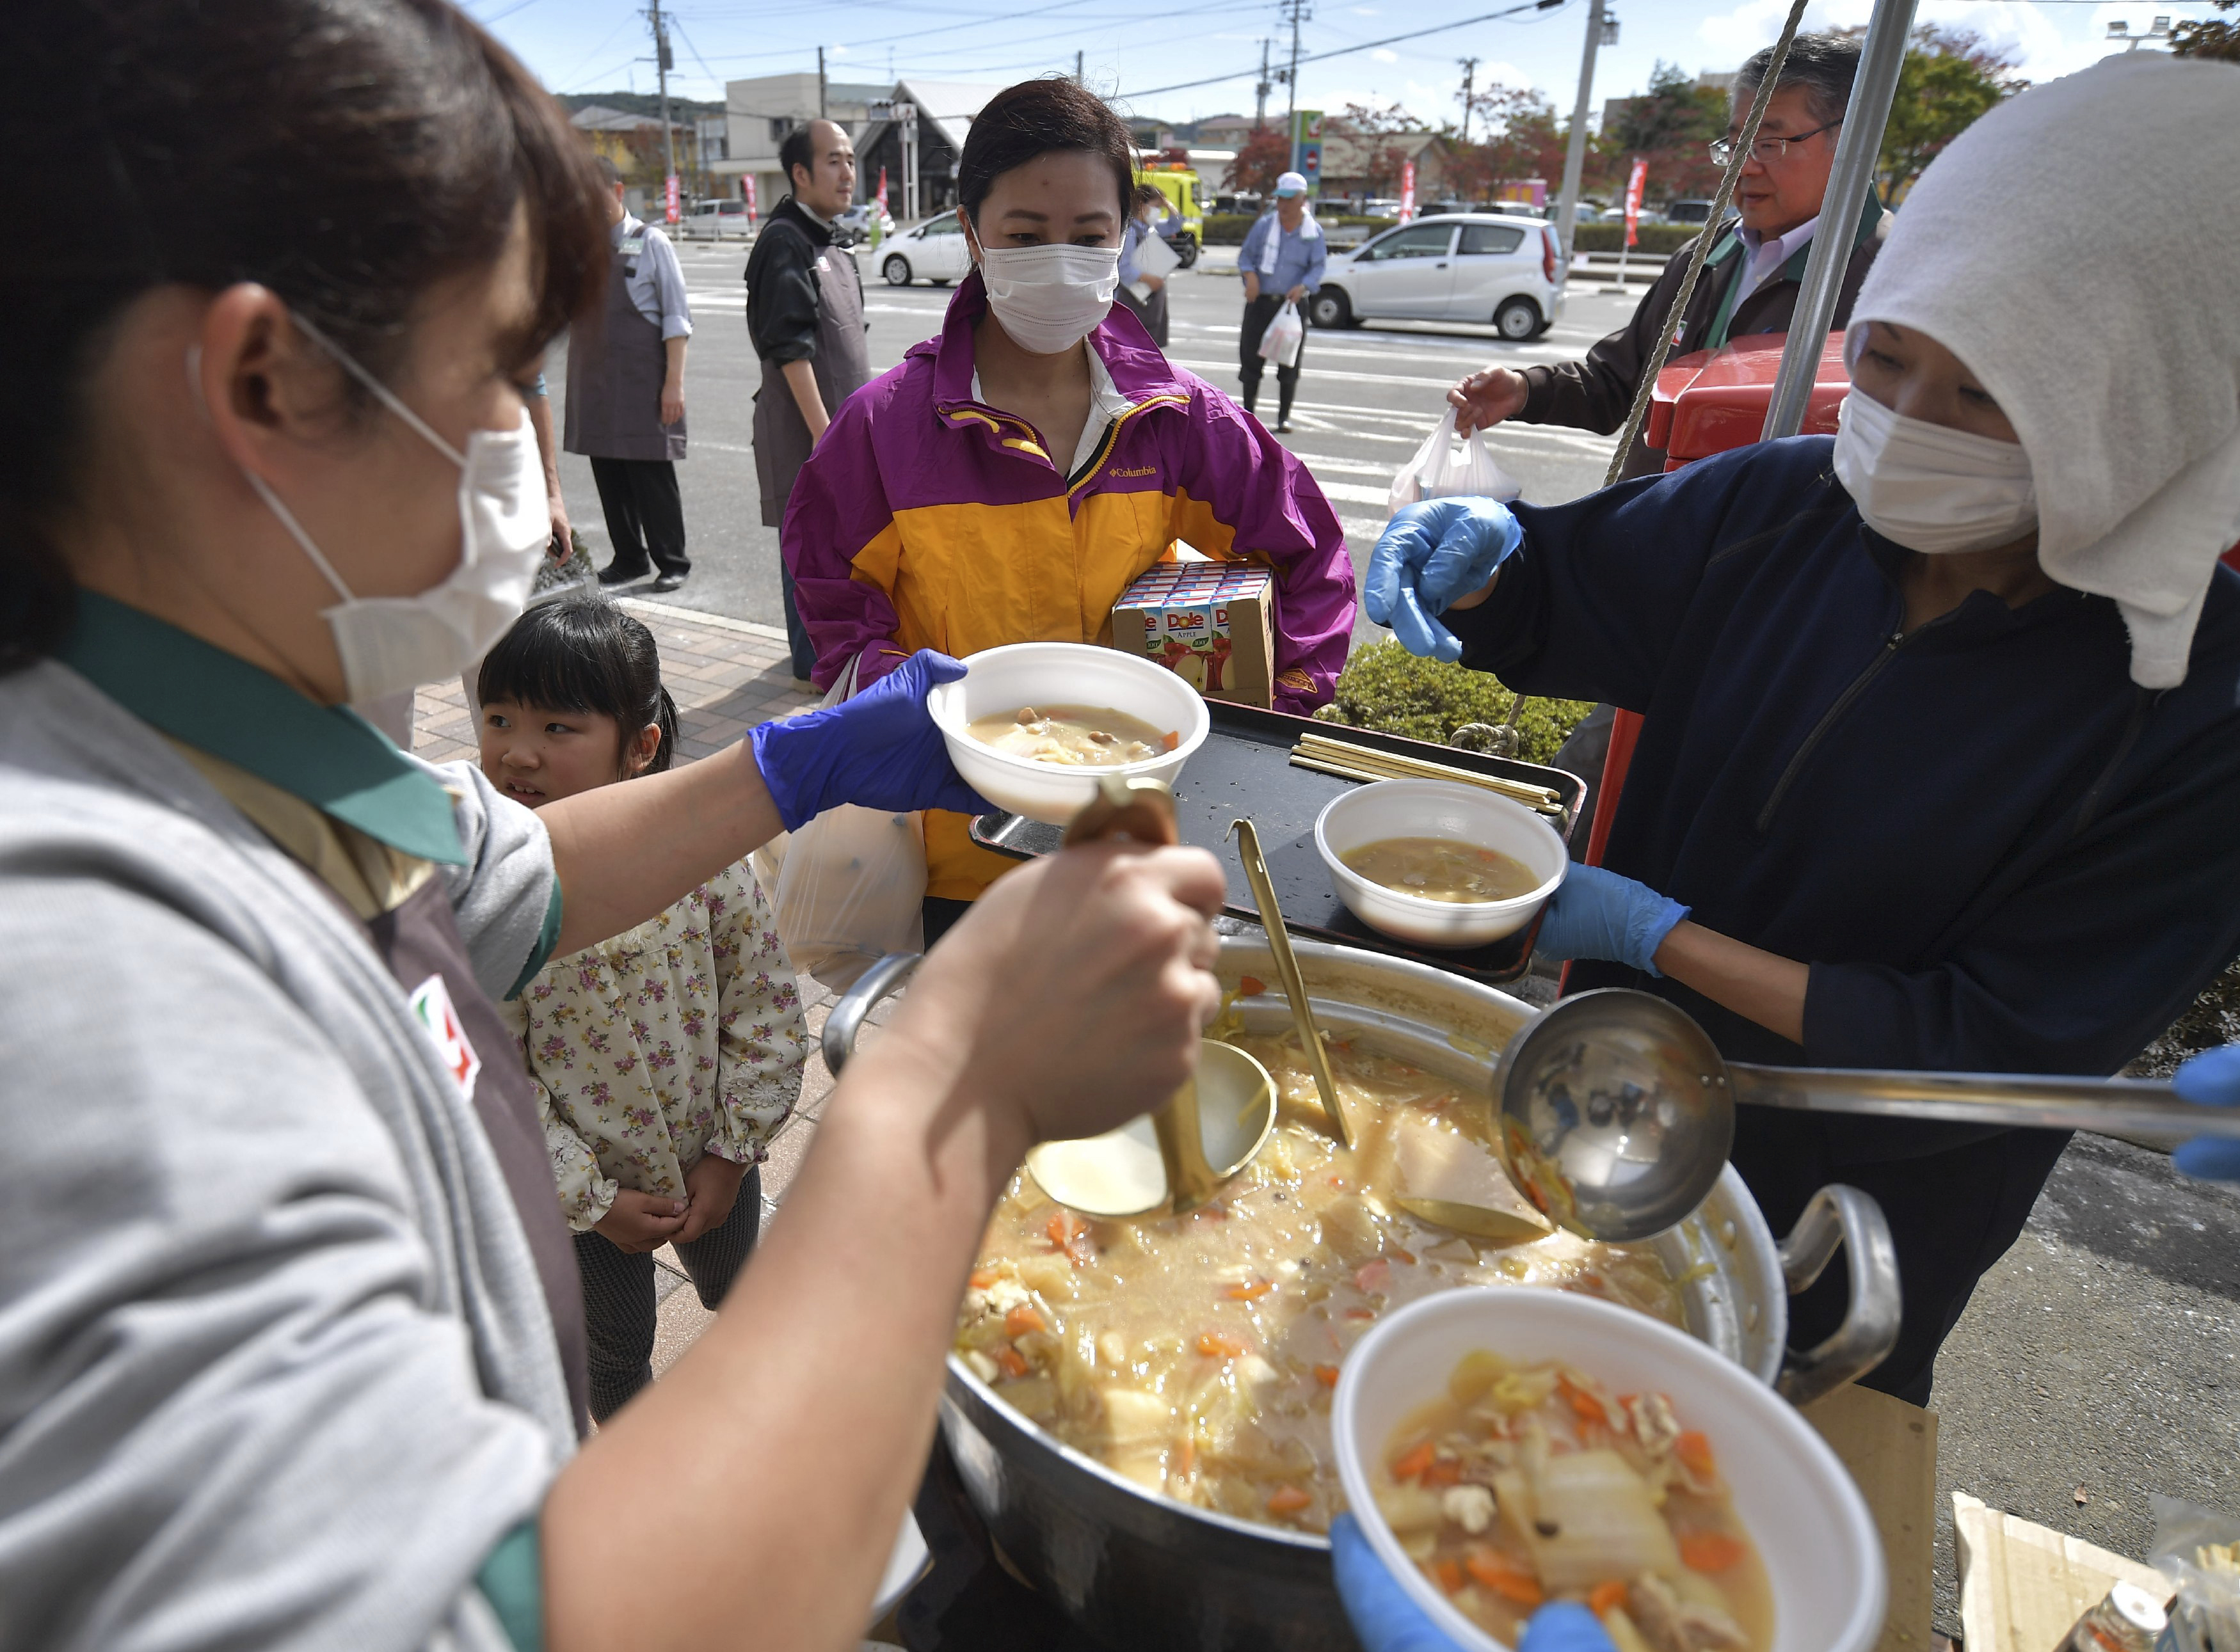 Disaster victims receive food in Motomiya, Fukushima prefecture on Oct. 20, 2019. Typhoon Hagibis, a powerful super typhoon, made a landfall in Japan on Oct. 12th, and caused huge damage in wide area of Japan. 80 were killed and 11 are still missing as of 19th 5pm. ( The Yomiuri Shimbun via AP Images )